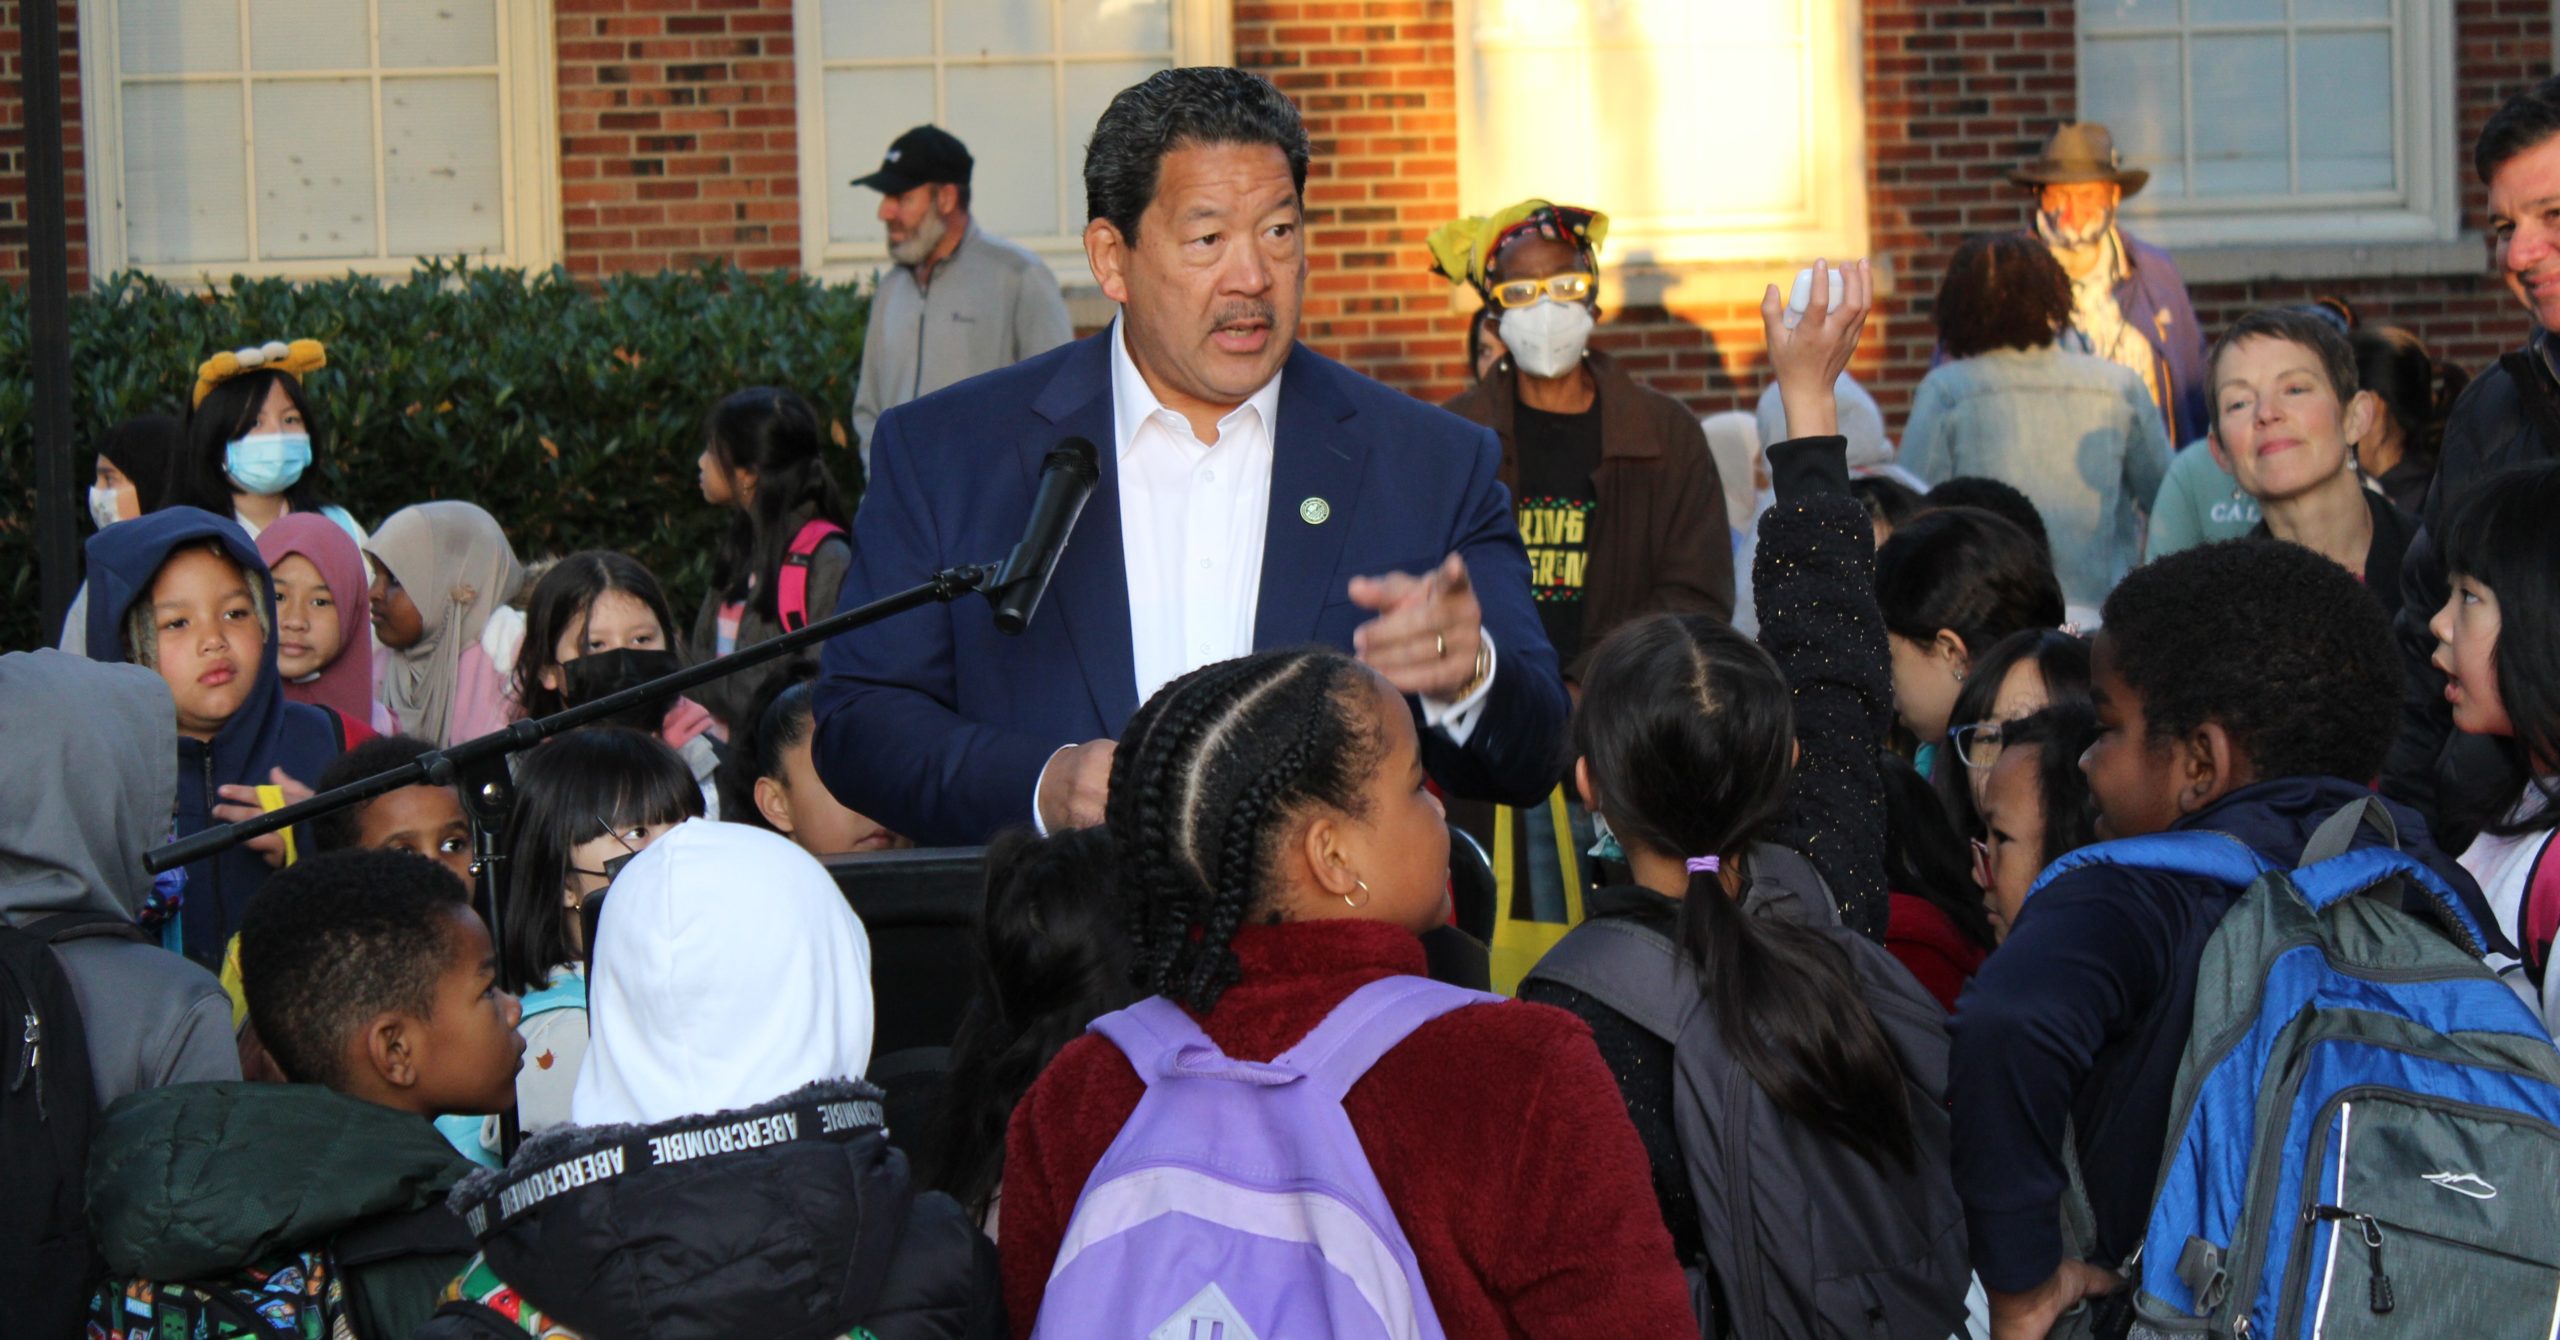 Mayor Harrell taking questions from young students outside school